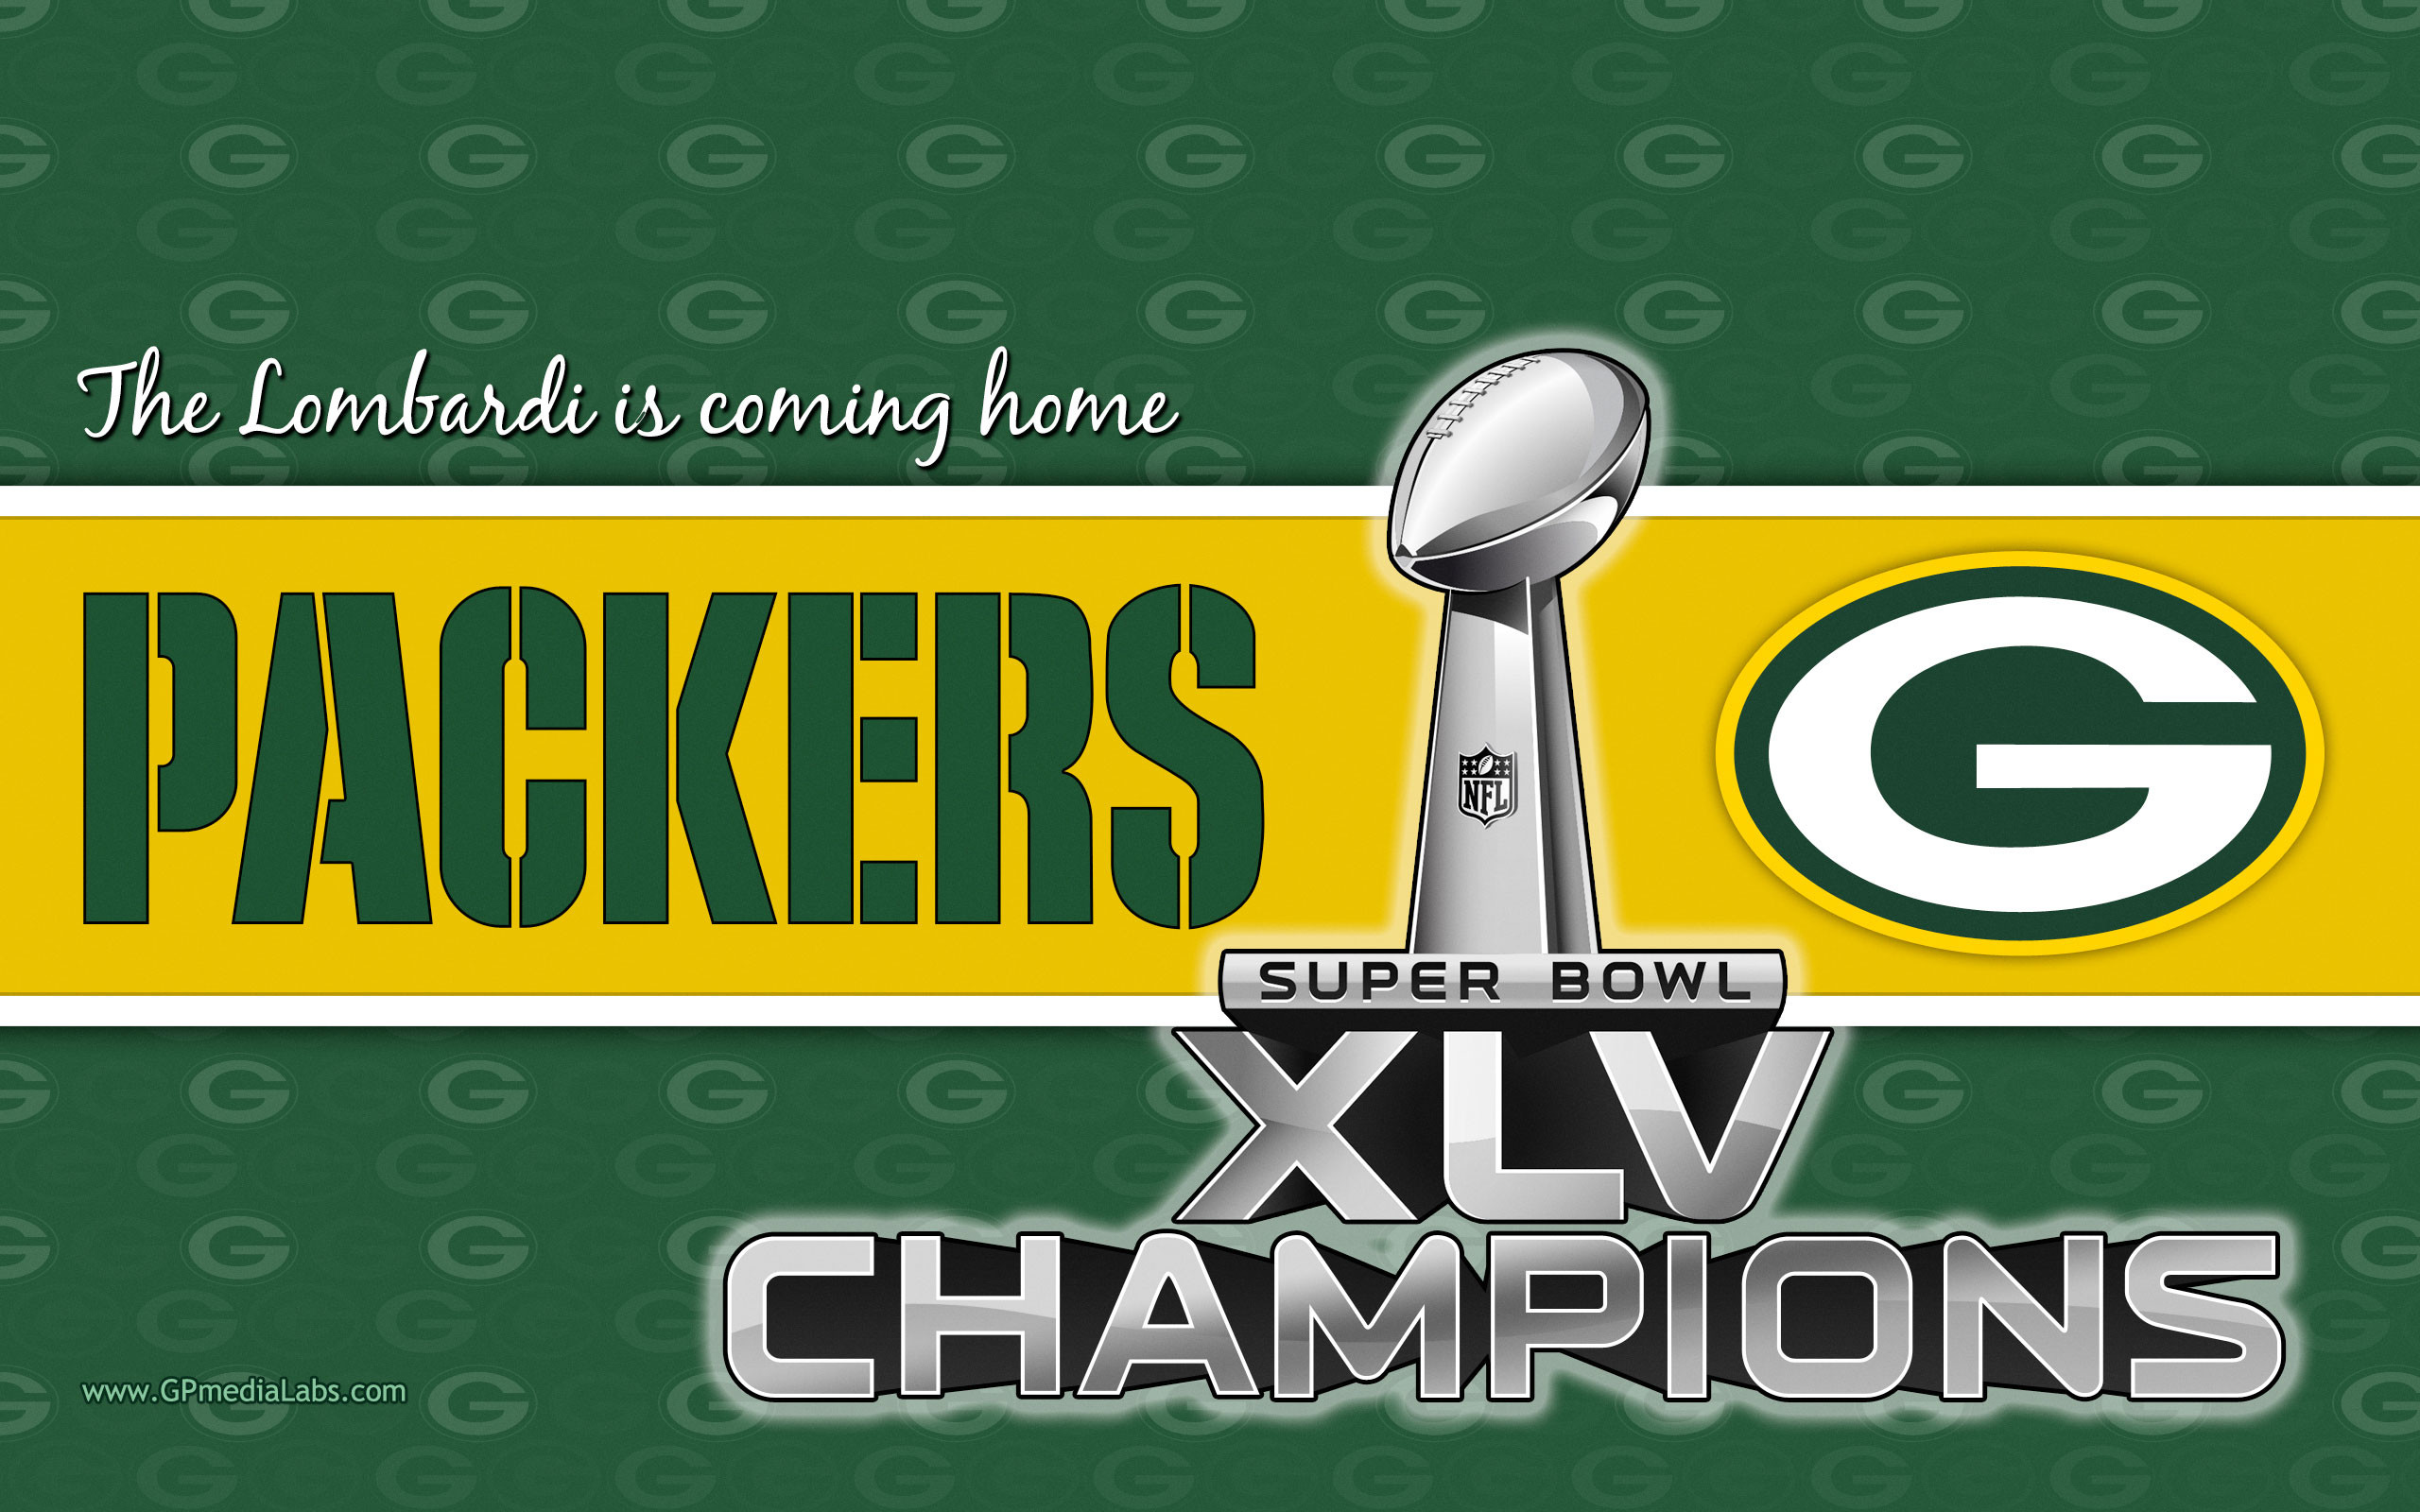 Green Bay Packers 2011 Wallpaper Ws 1920 X - Nfl Champions Green Bay Packers - HD Wallpaper 